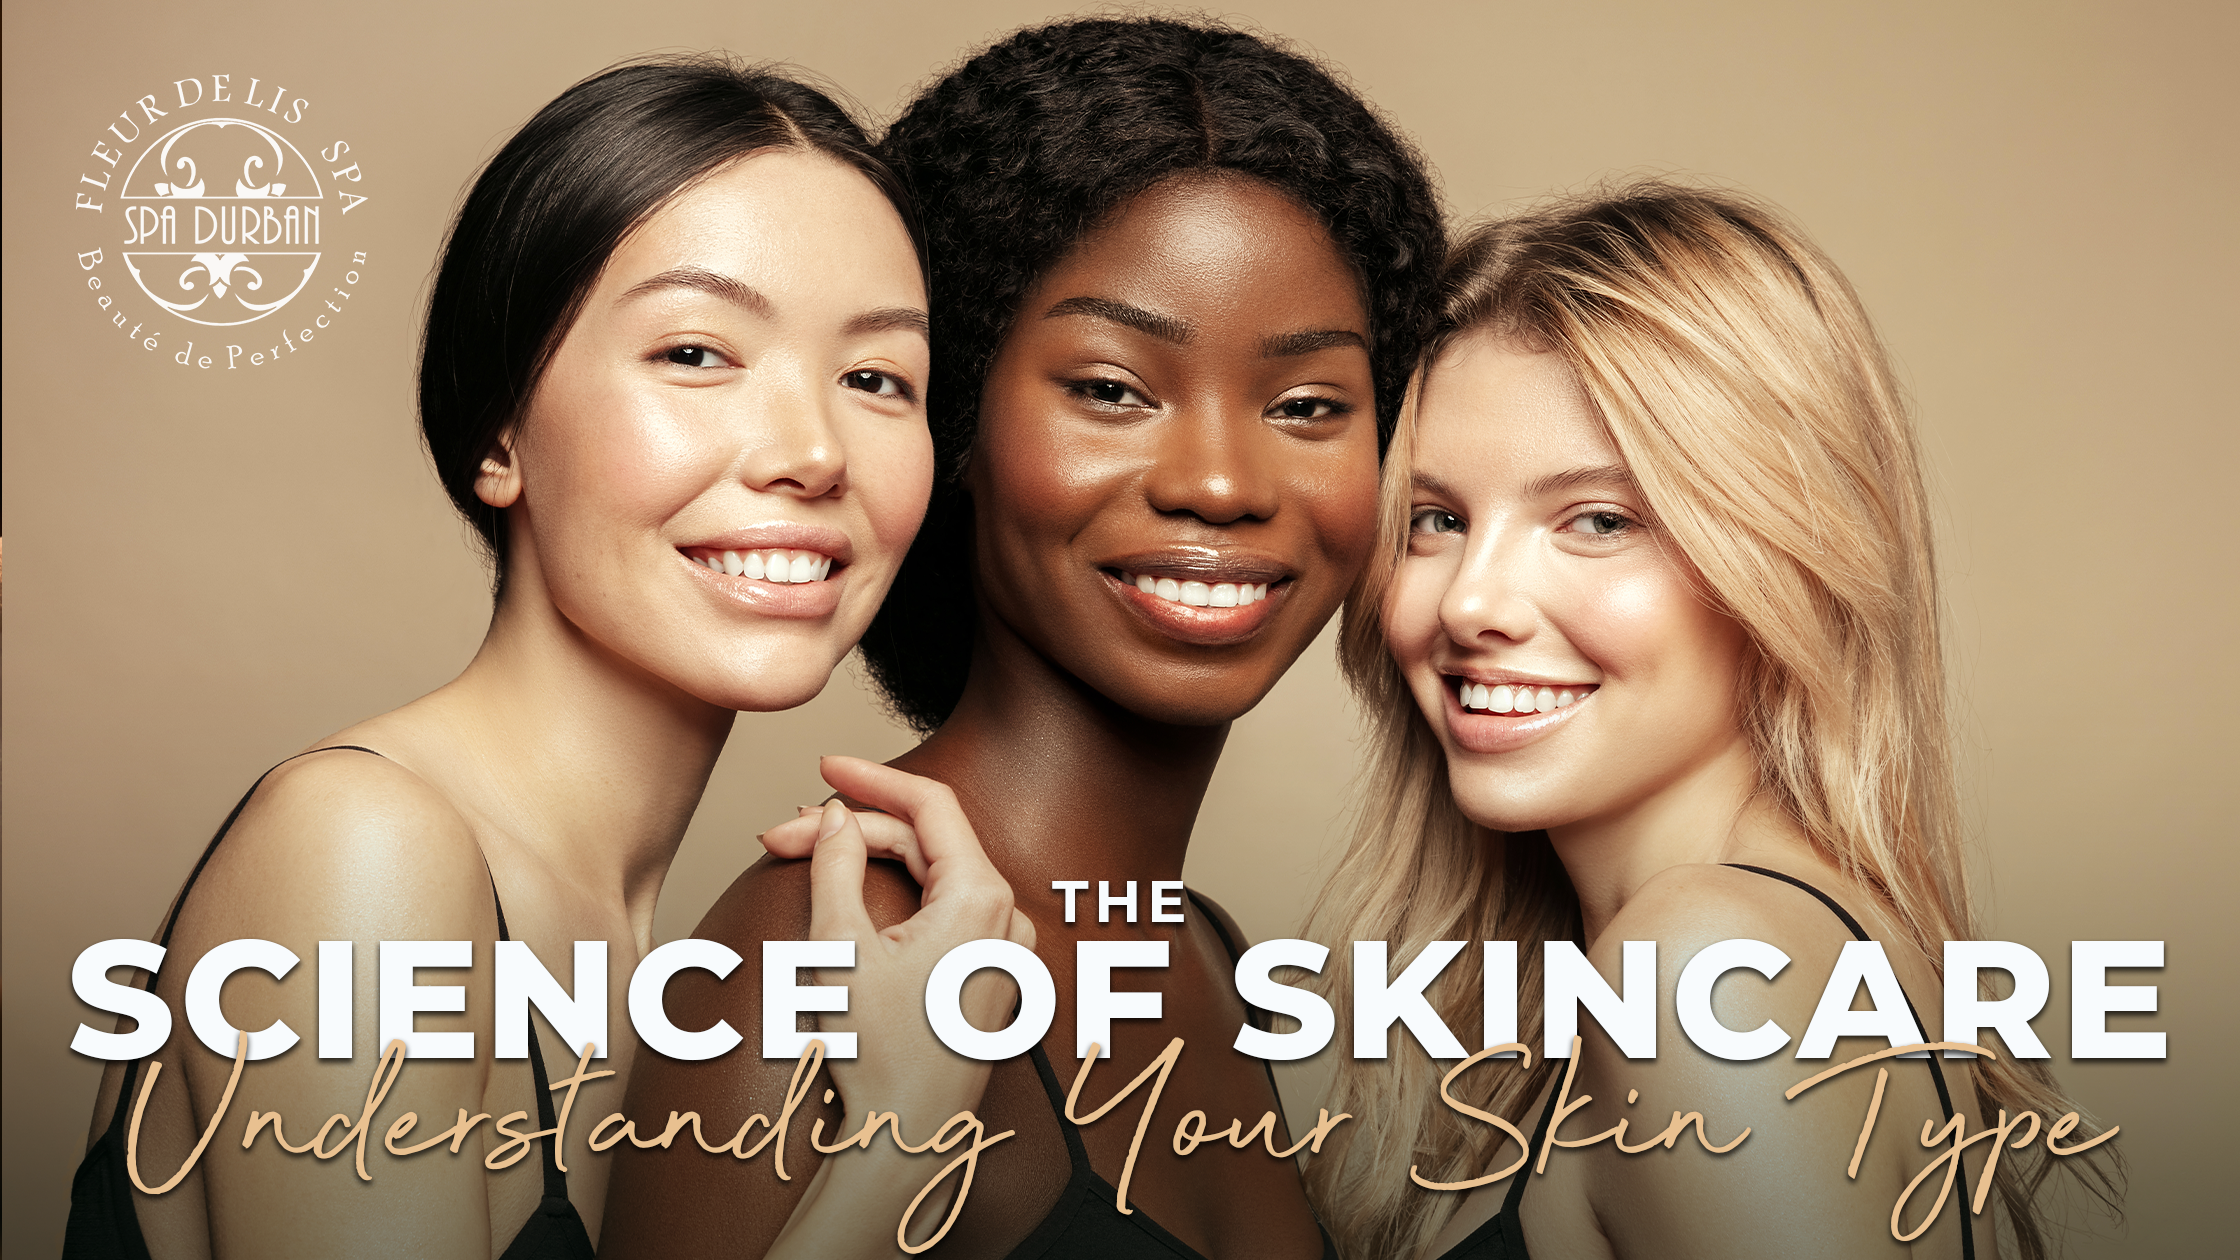 The Science of Skincare: Understanding Your Skin Type